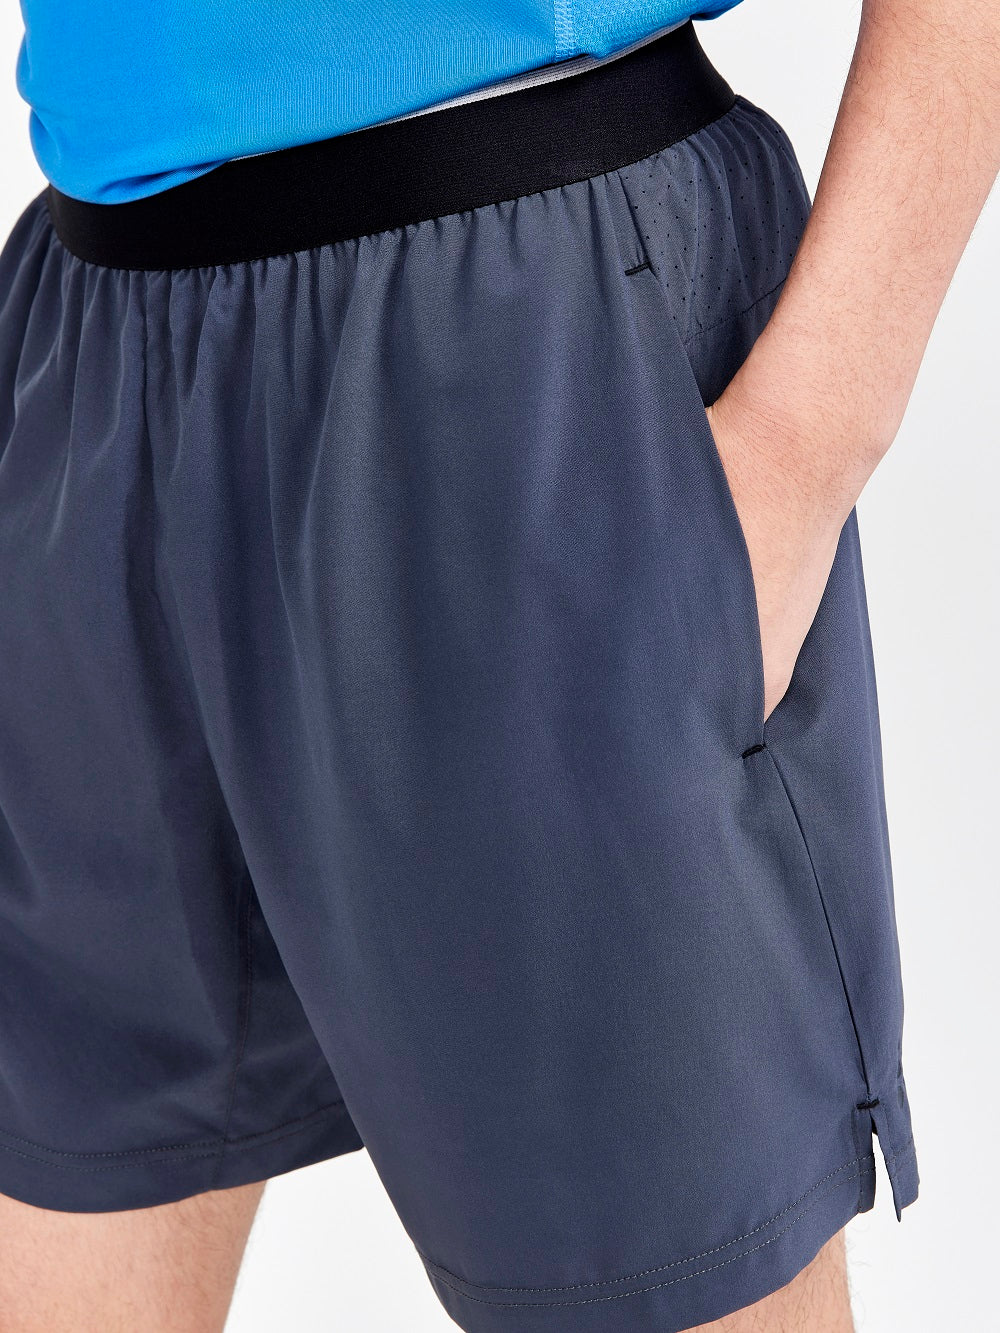 2-IN-1 DRY TECH SHORTS 2.0 – New Edition